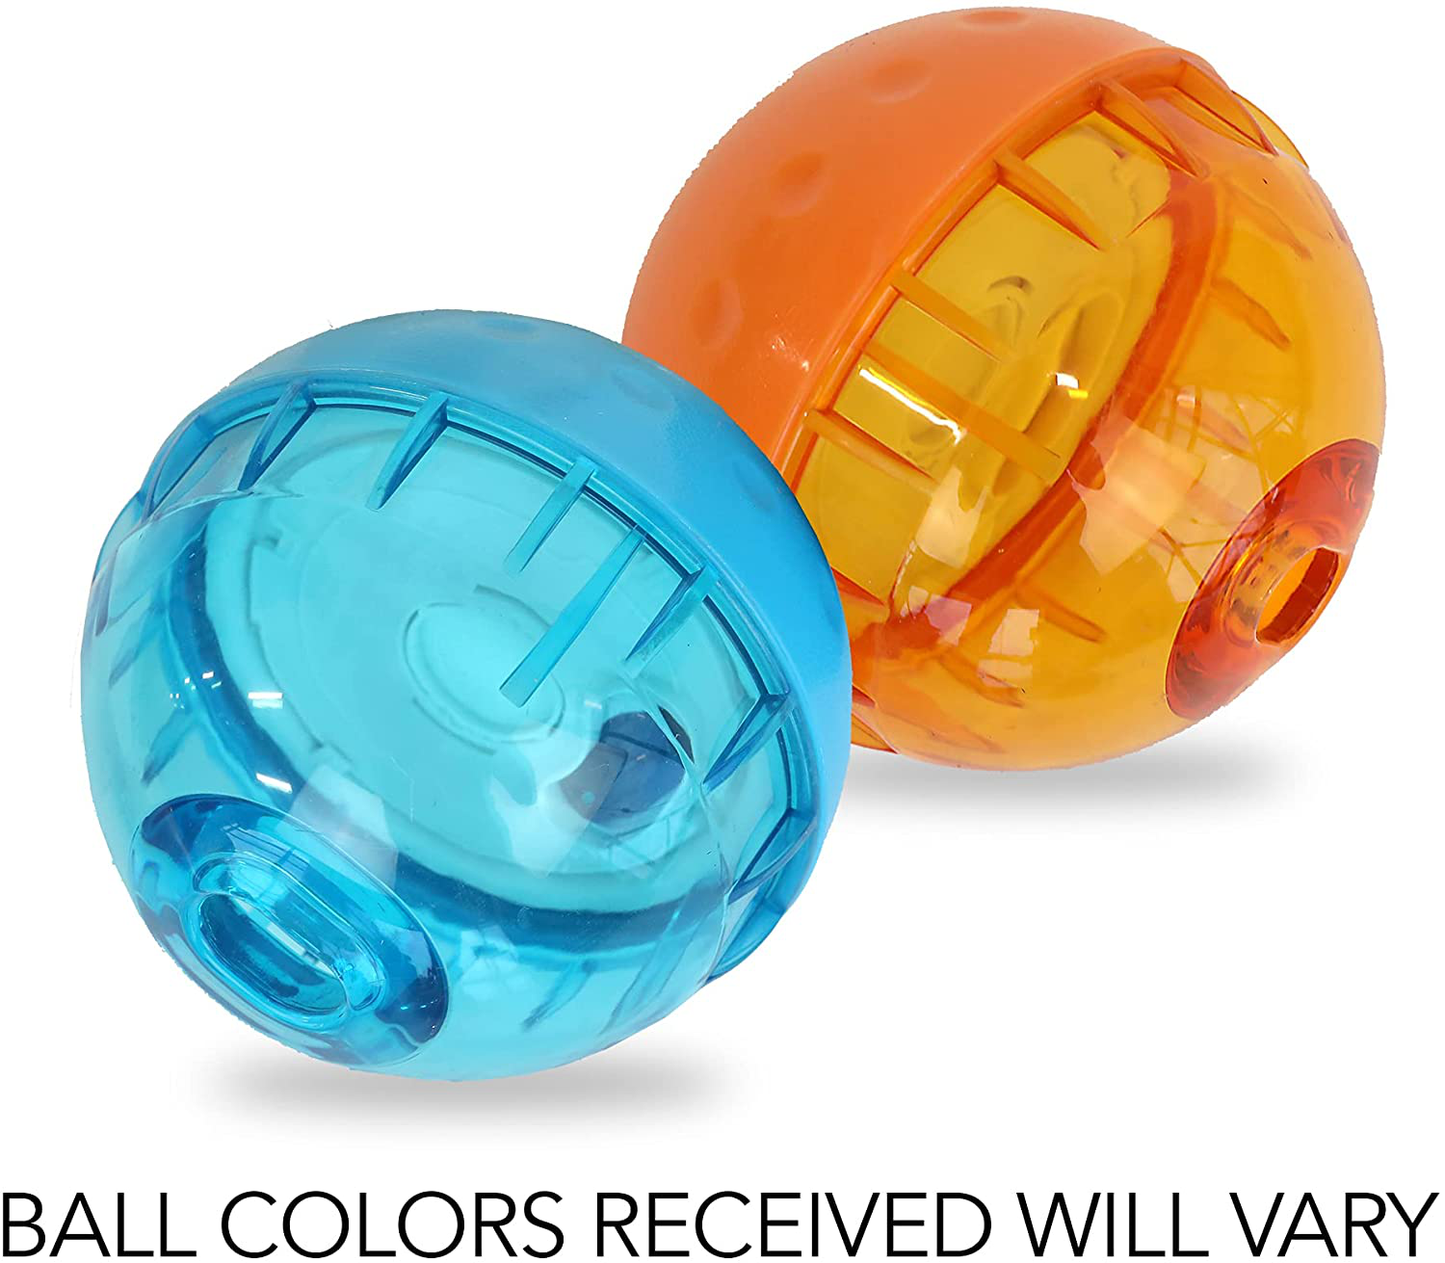 Ourpets IQ Treat Ball Dog Ball Dog Toy & Dog Slow Feeder (Interactive Dog Toys, Dog Puzzle Toys, Treat Dispensing Dog Toys - Great Alternative to Slow Feeder Dog Bowls) 2 Size Options-Colors May Vary